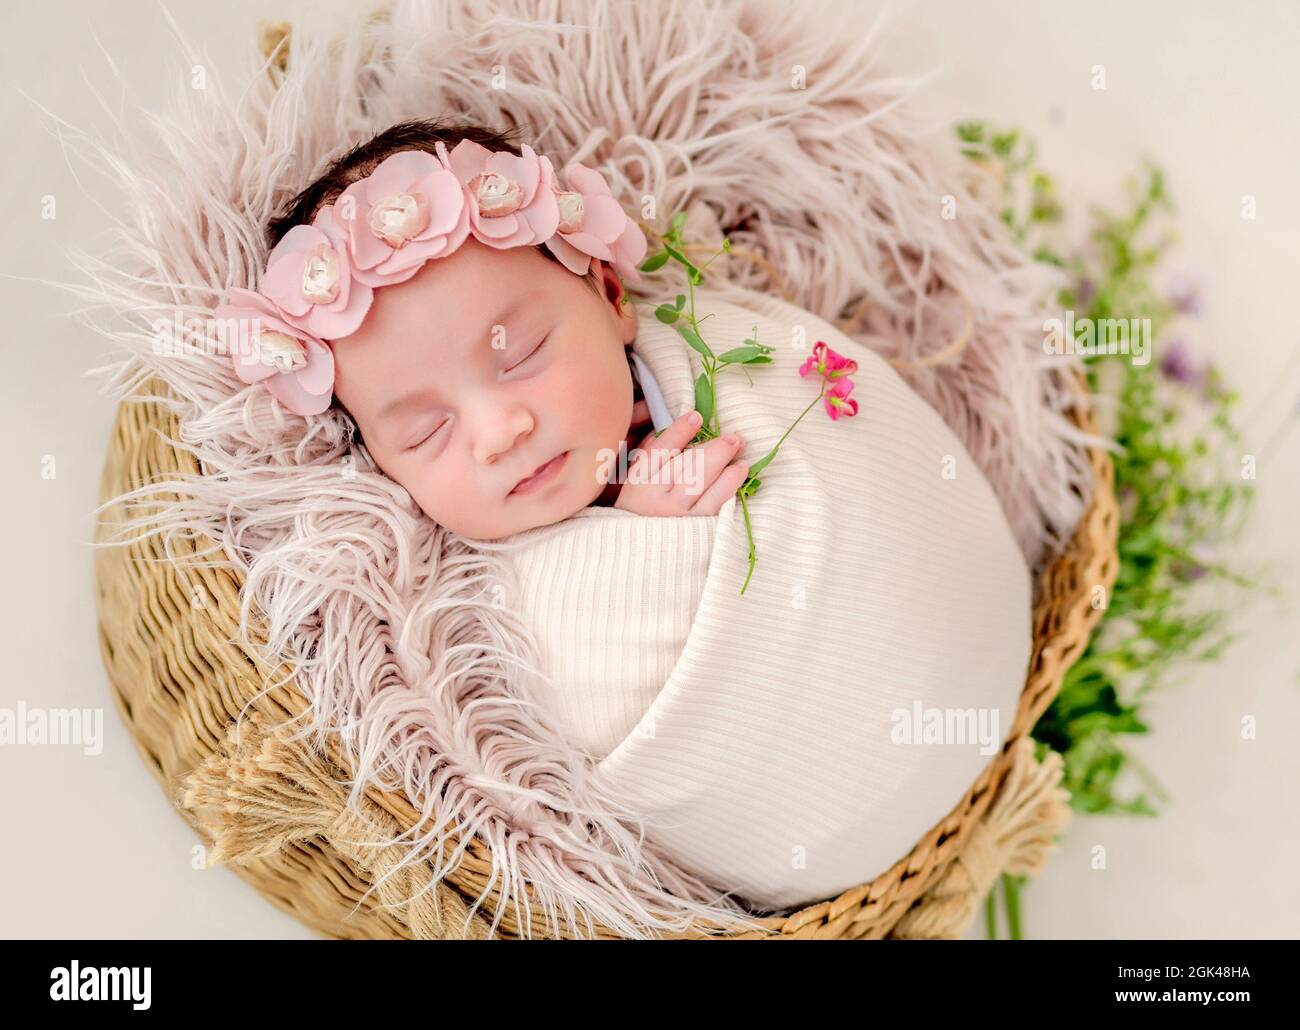 Portrait of beautiful newborn baby girl swaadled in fabric and wearing wreath with flowers sleeping in basket with fur during studio photoshoot. Cute Stock Photo